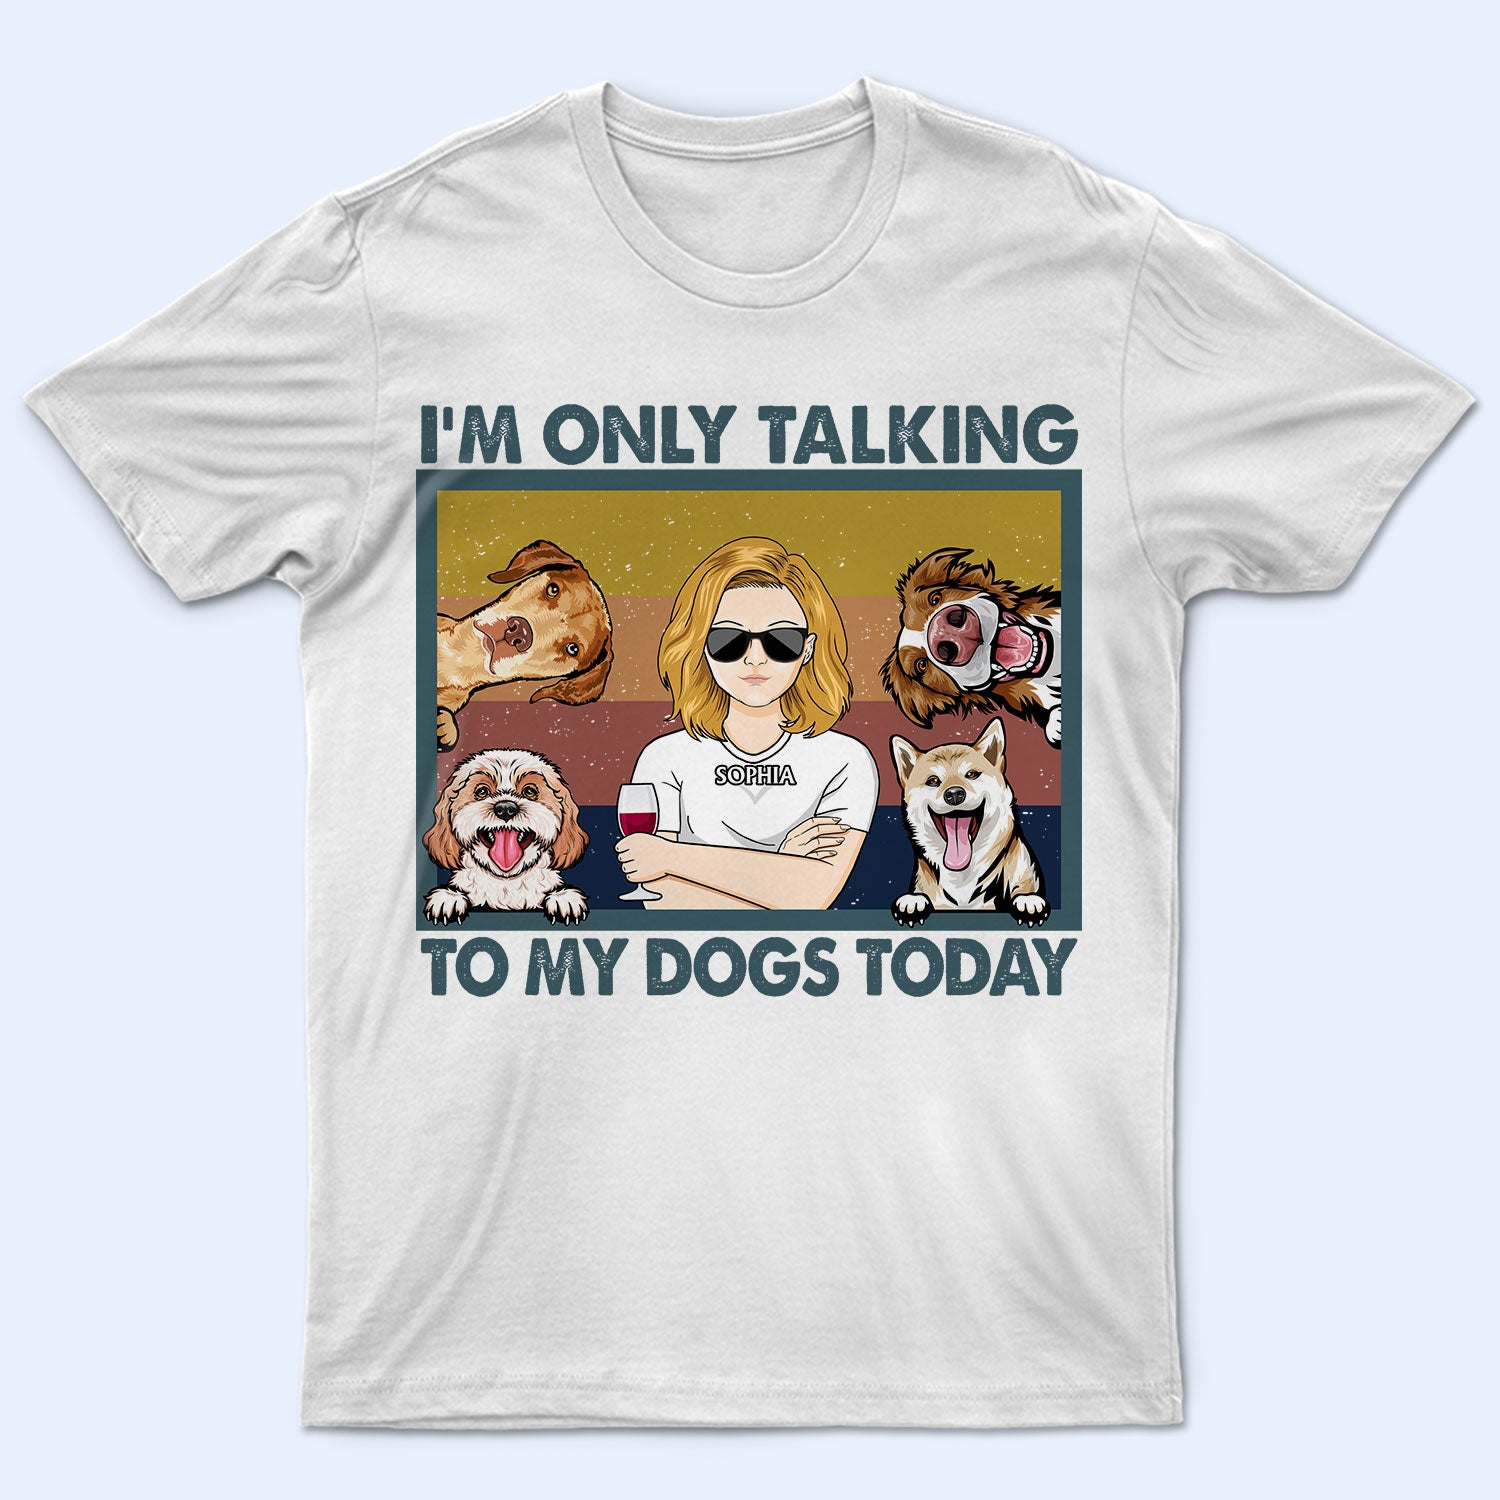 I'm Only Talking To My Dogs Today - Funny, Birthday Gift For Dog Mom, Dog Lovers, Pet Owners - Personalized Custom T Shirt